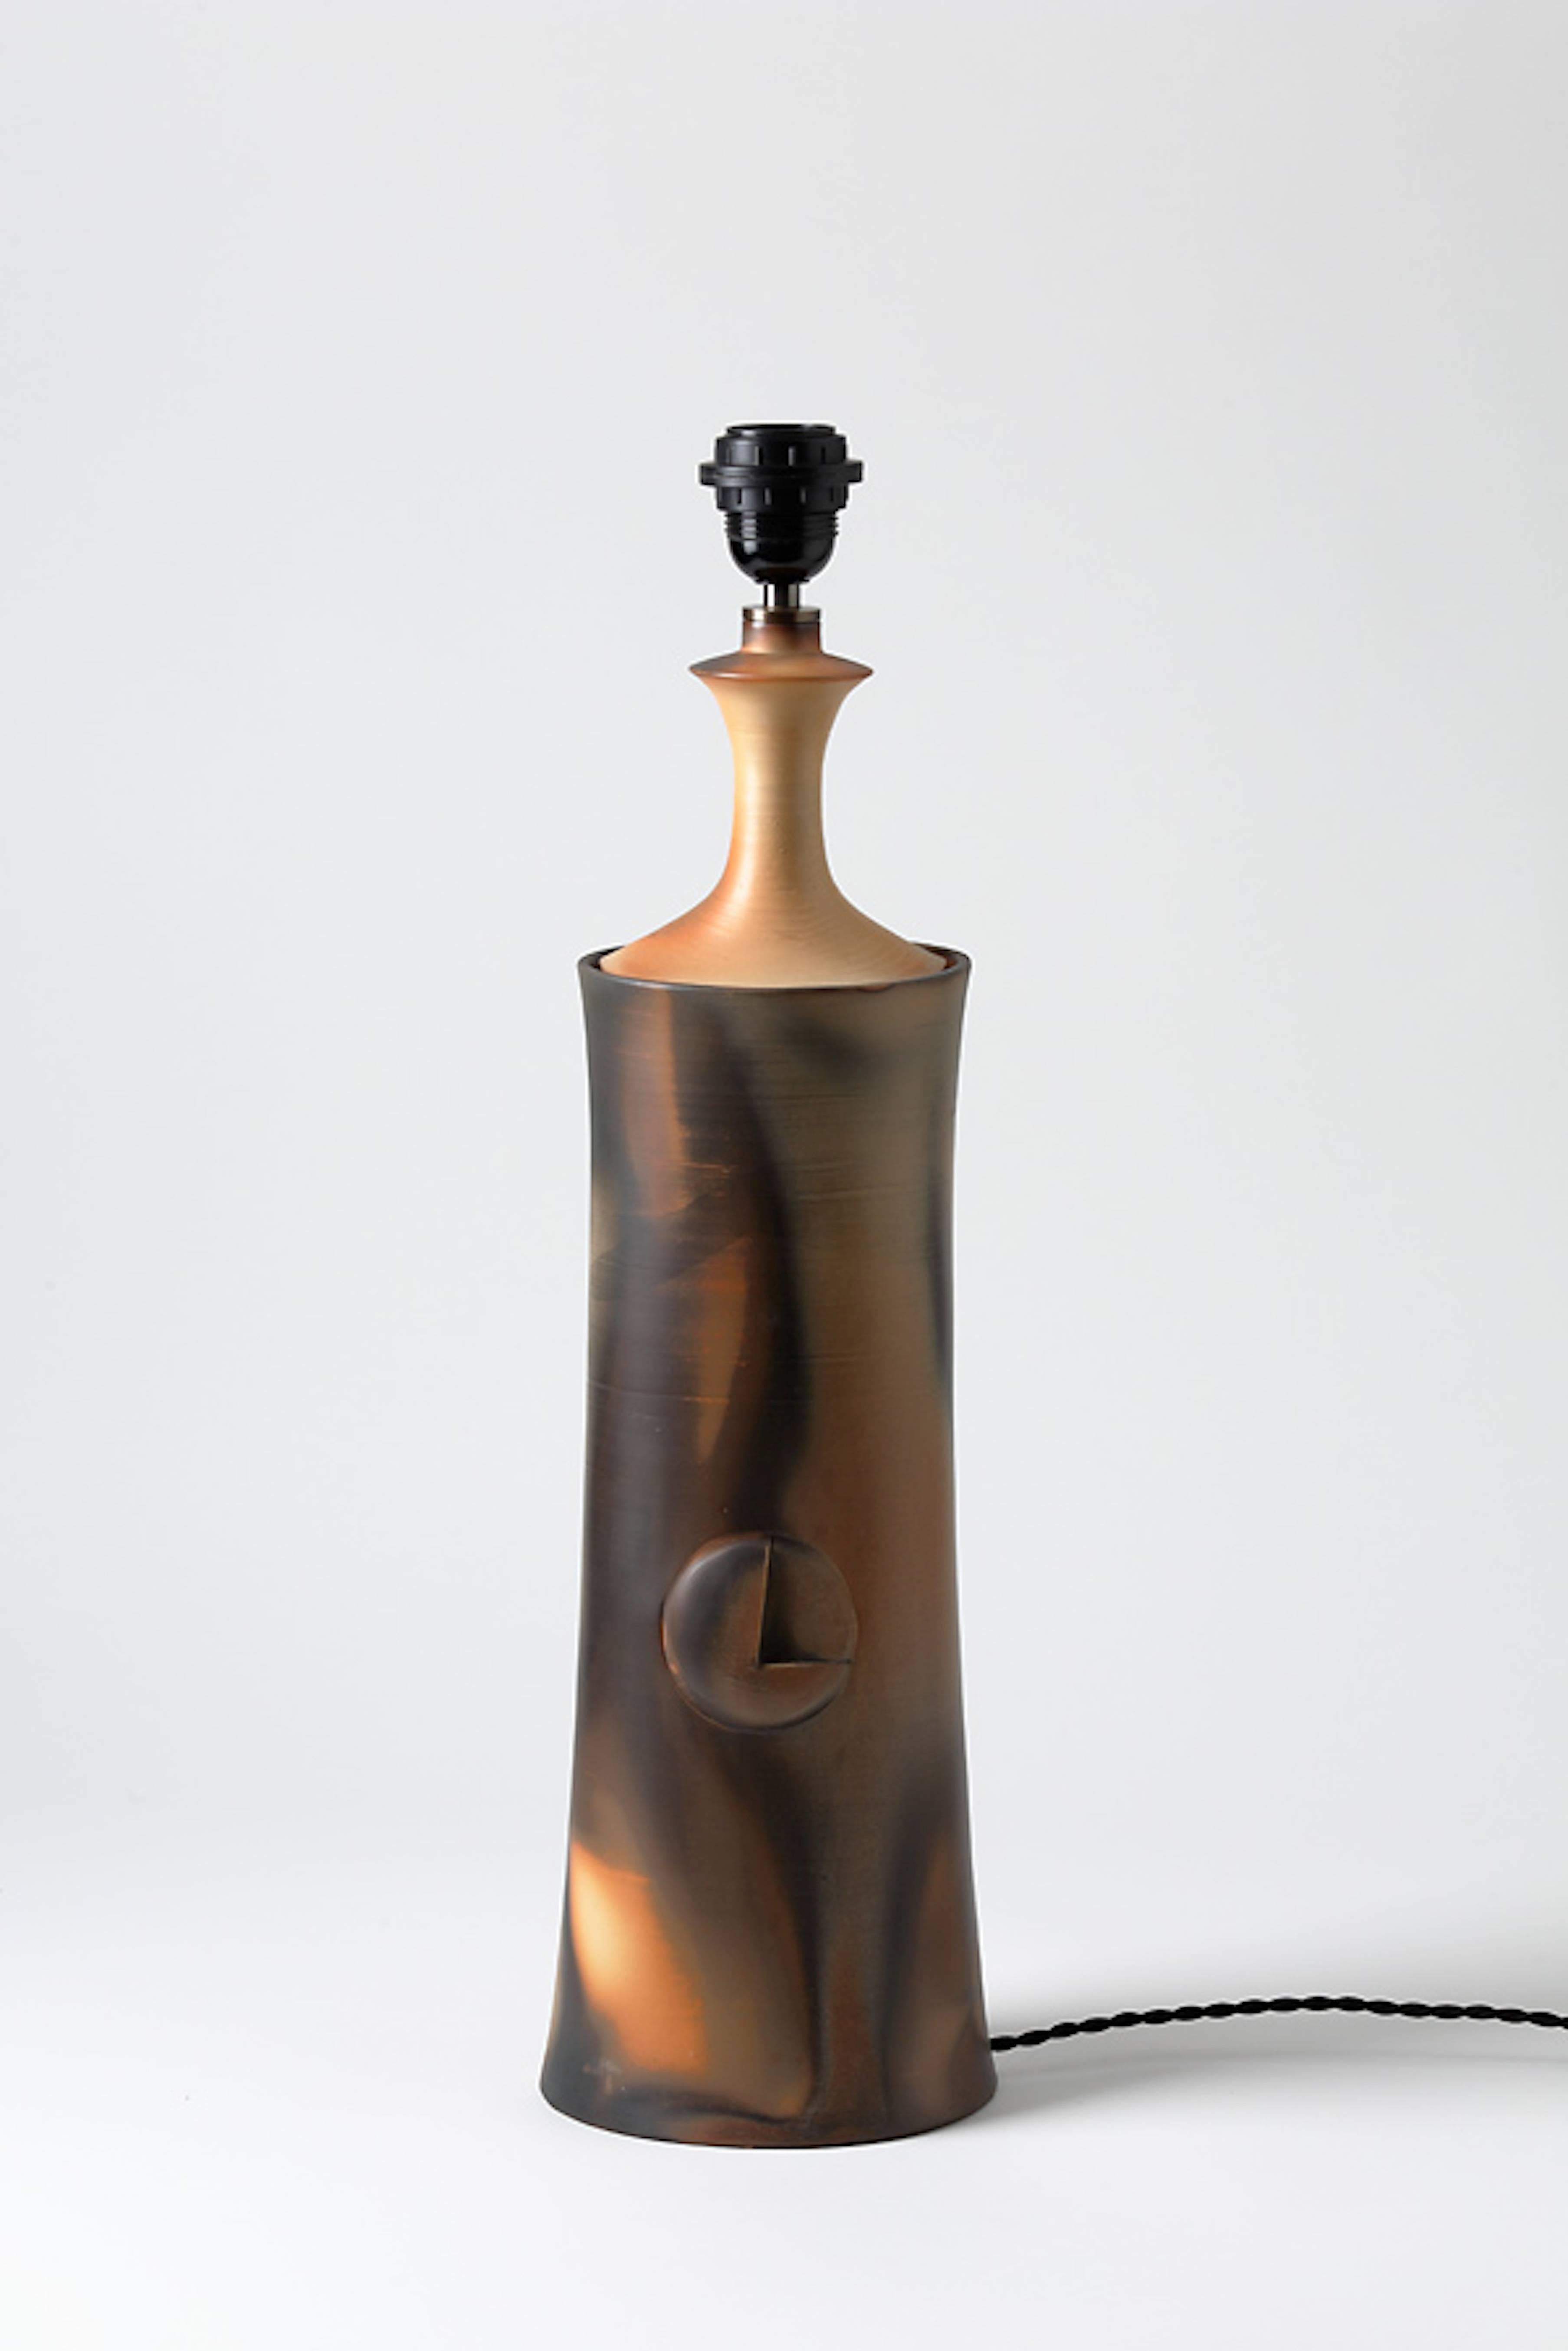 French Elegant Brown and Orange Ceramic Lamp by Pierre Bayle, circa 1980-1990 For Sale